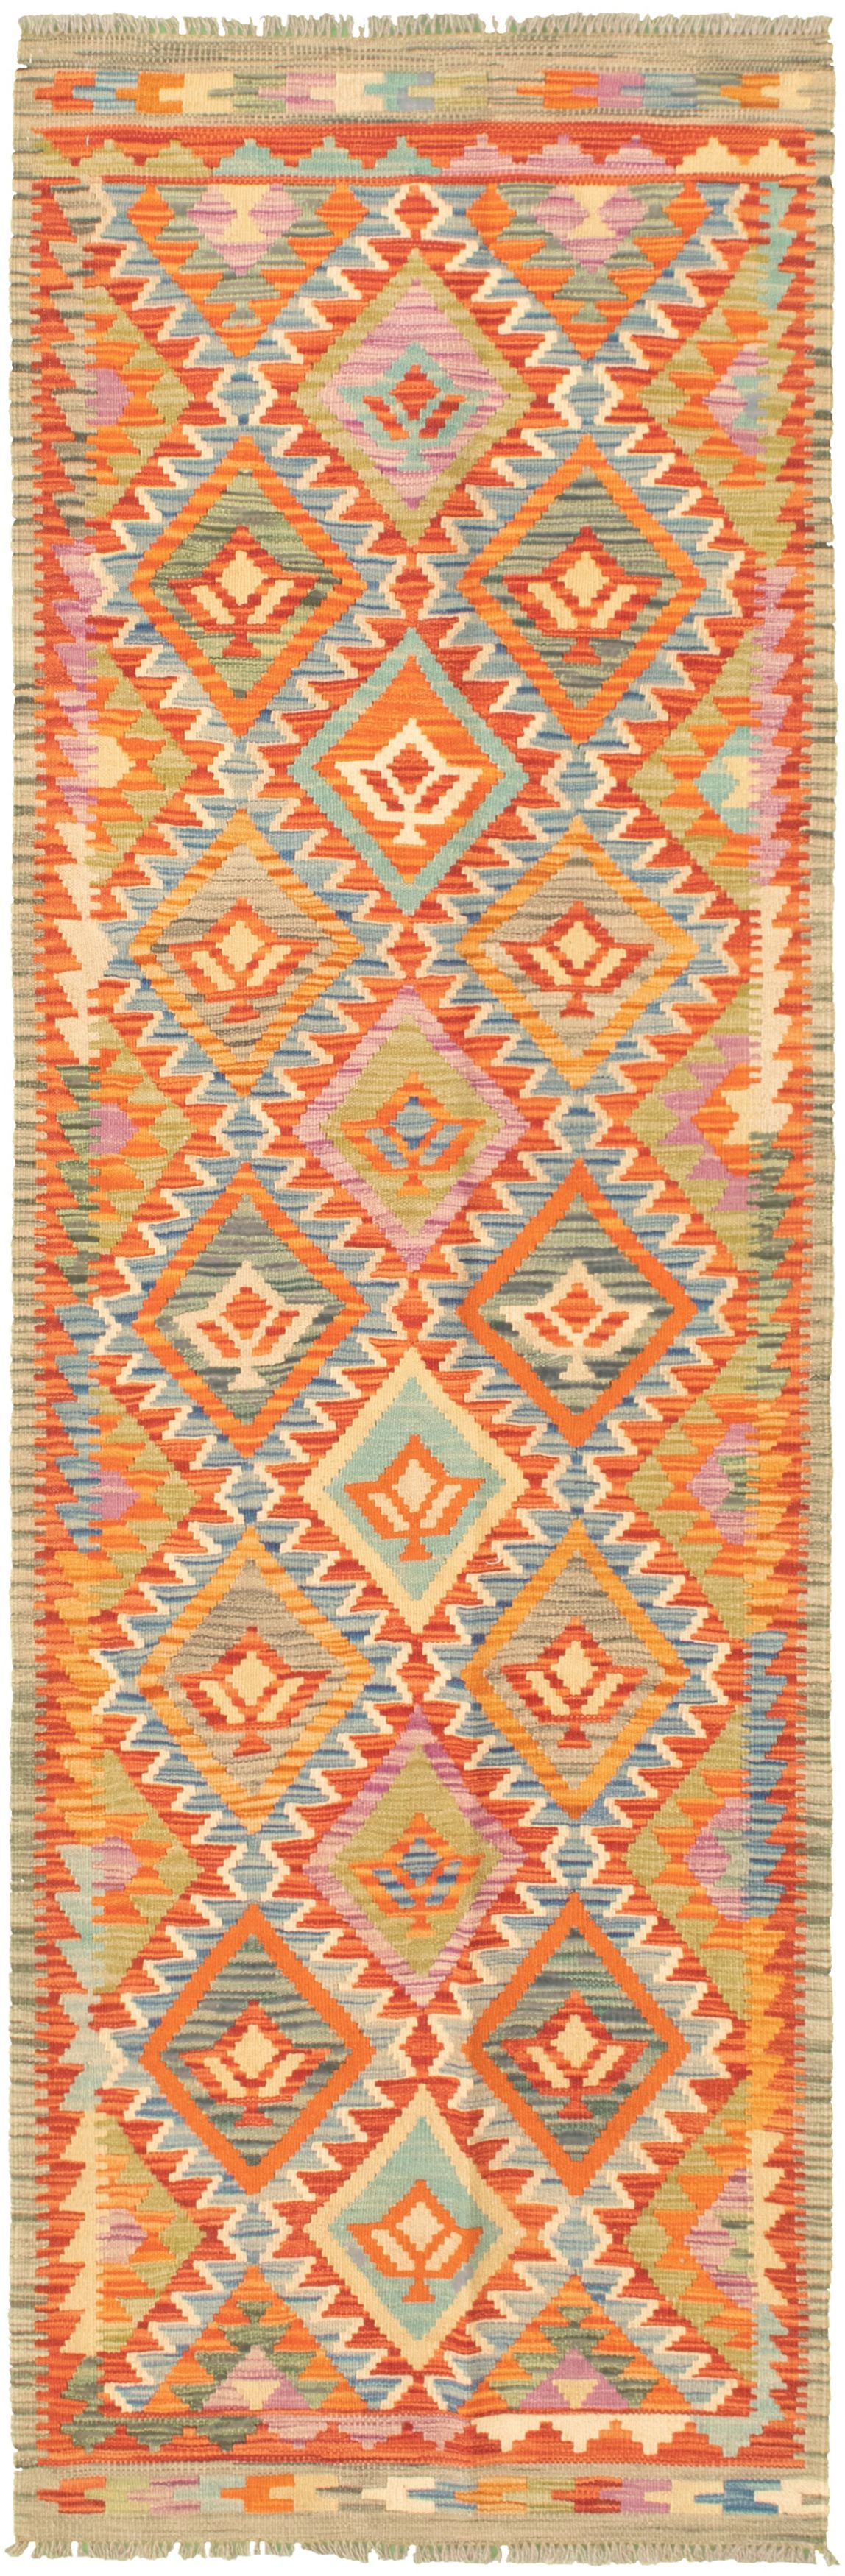 Hand woven Bold and Colorful  Dark Copper Wool Kilim 2'7" x 8'3" Size: 2'7" x 8'3"  